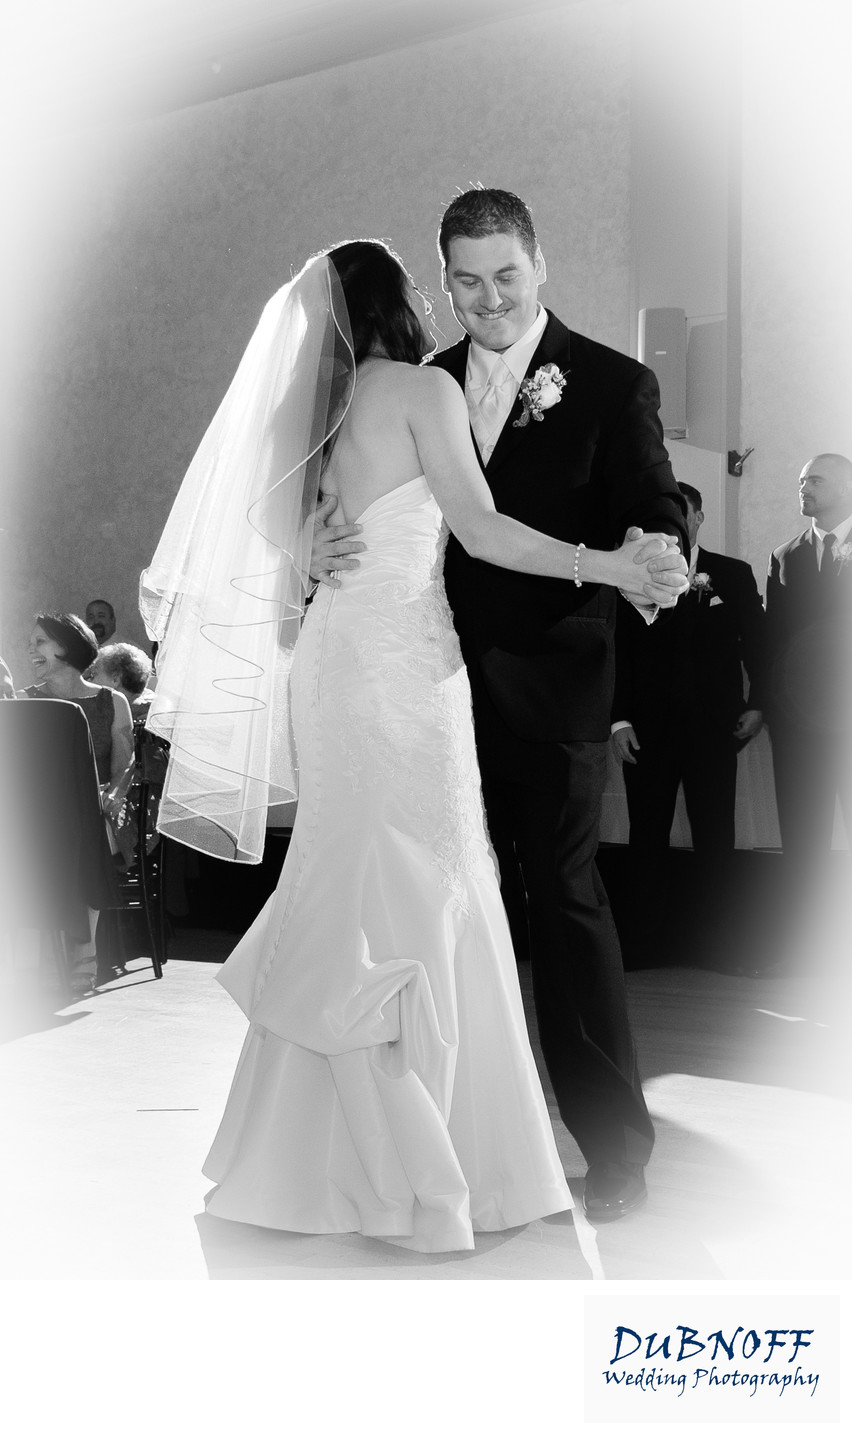 First Marriage Dance Black and White wedding photography